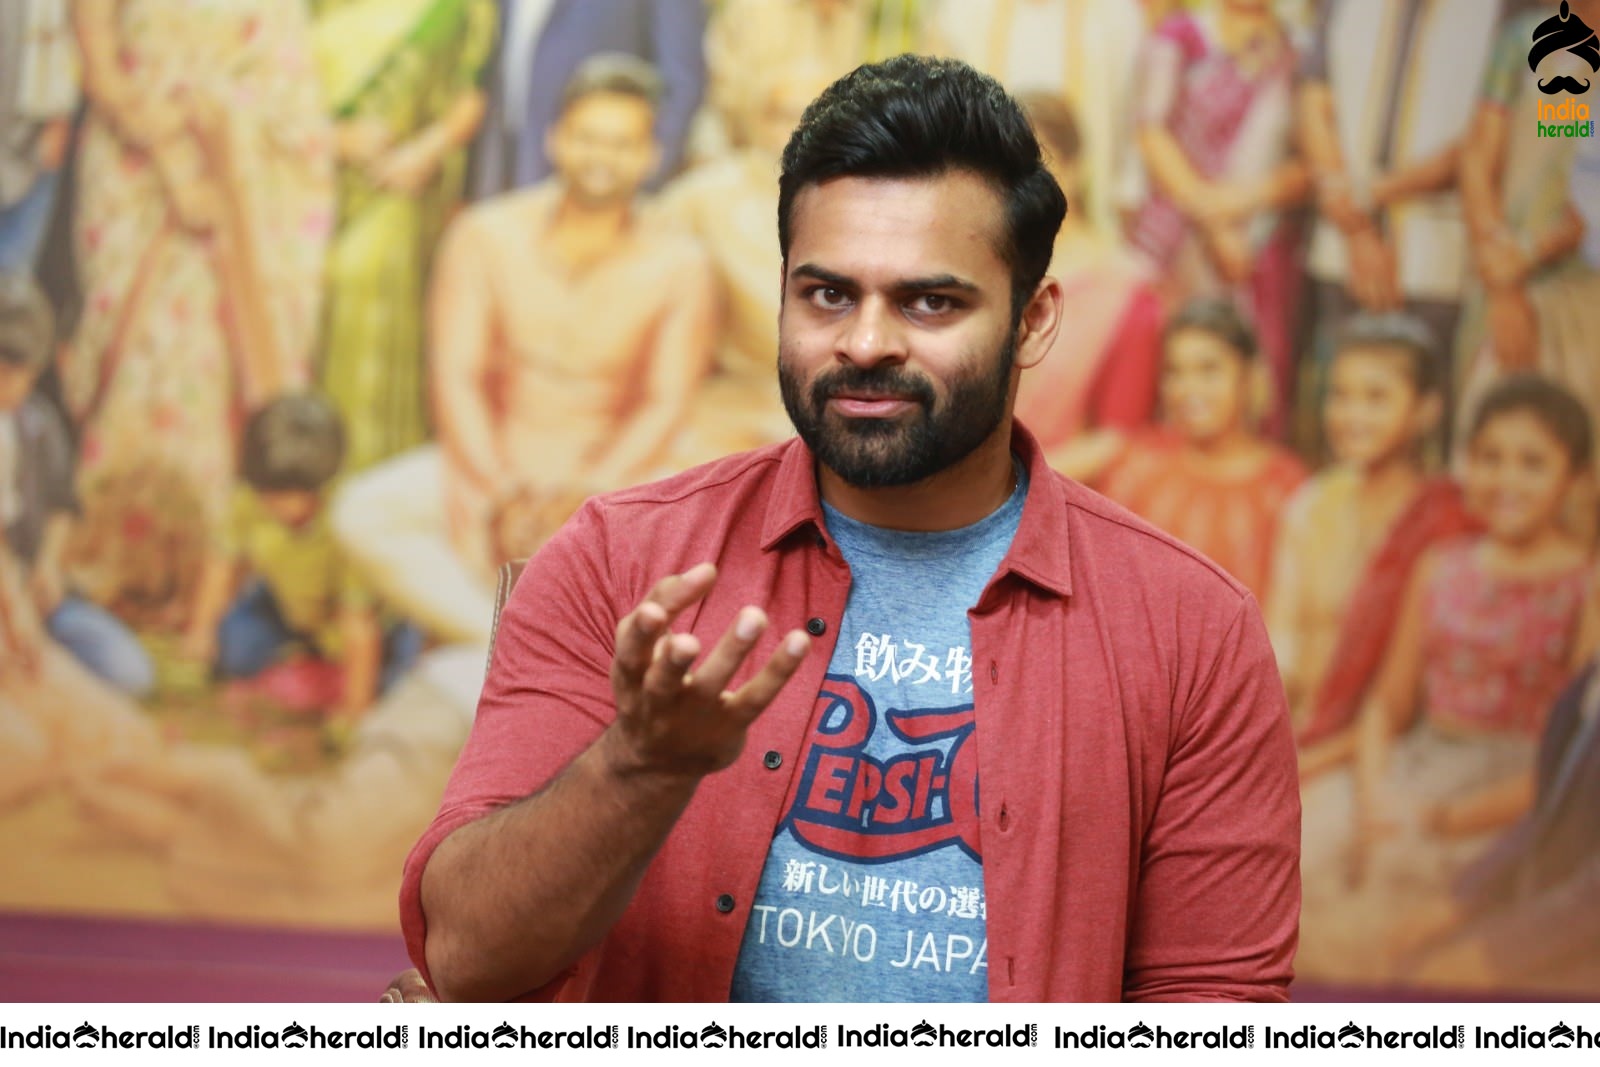 Actor Sai Dharam Tej is looking smart and stylish in these Photos